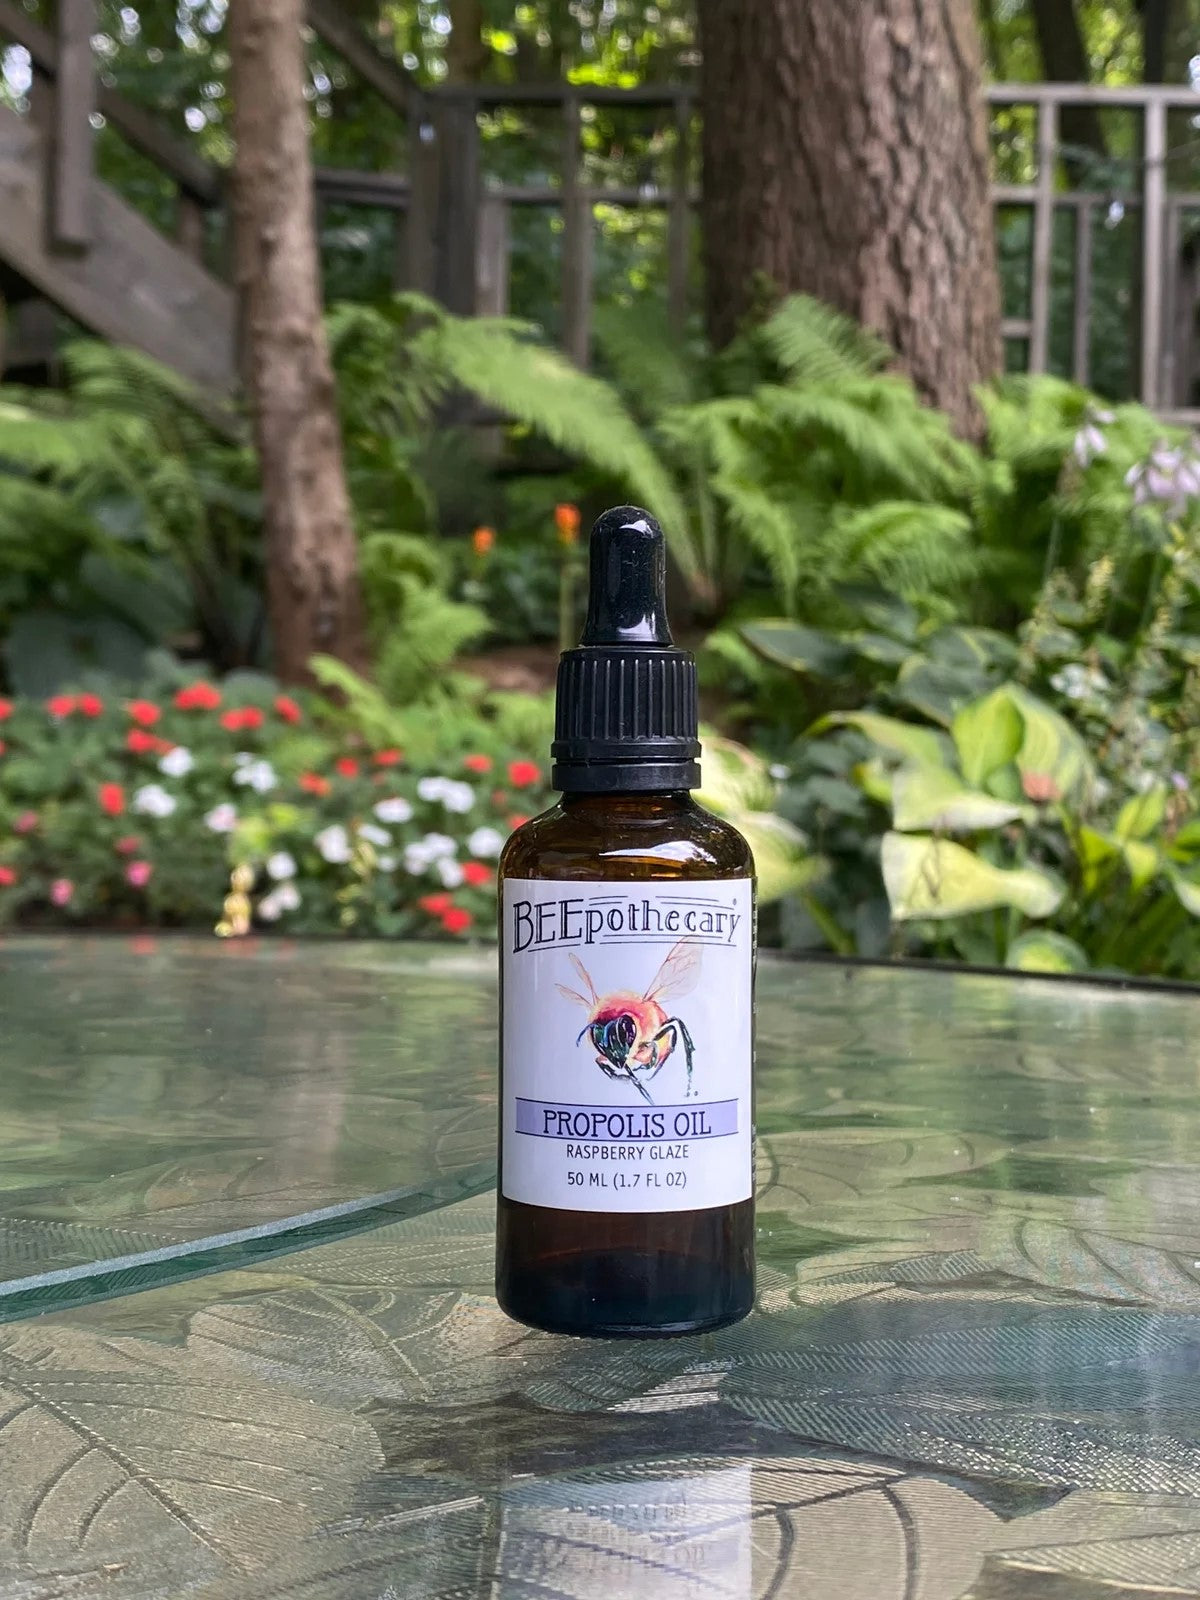 BEEpothecary Propolis Oil Raspberry Glaze in 50 ml brown bottle with white label and dropper